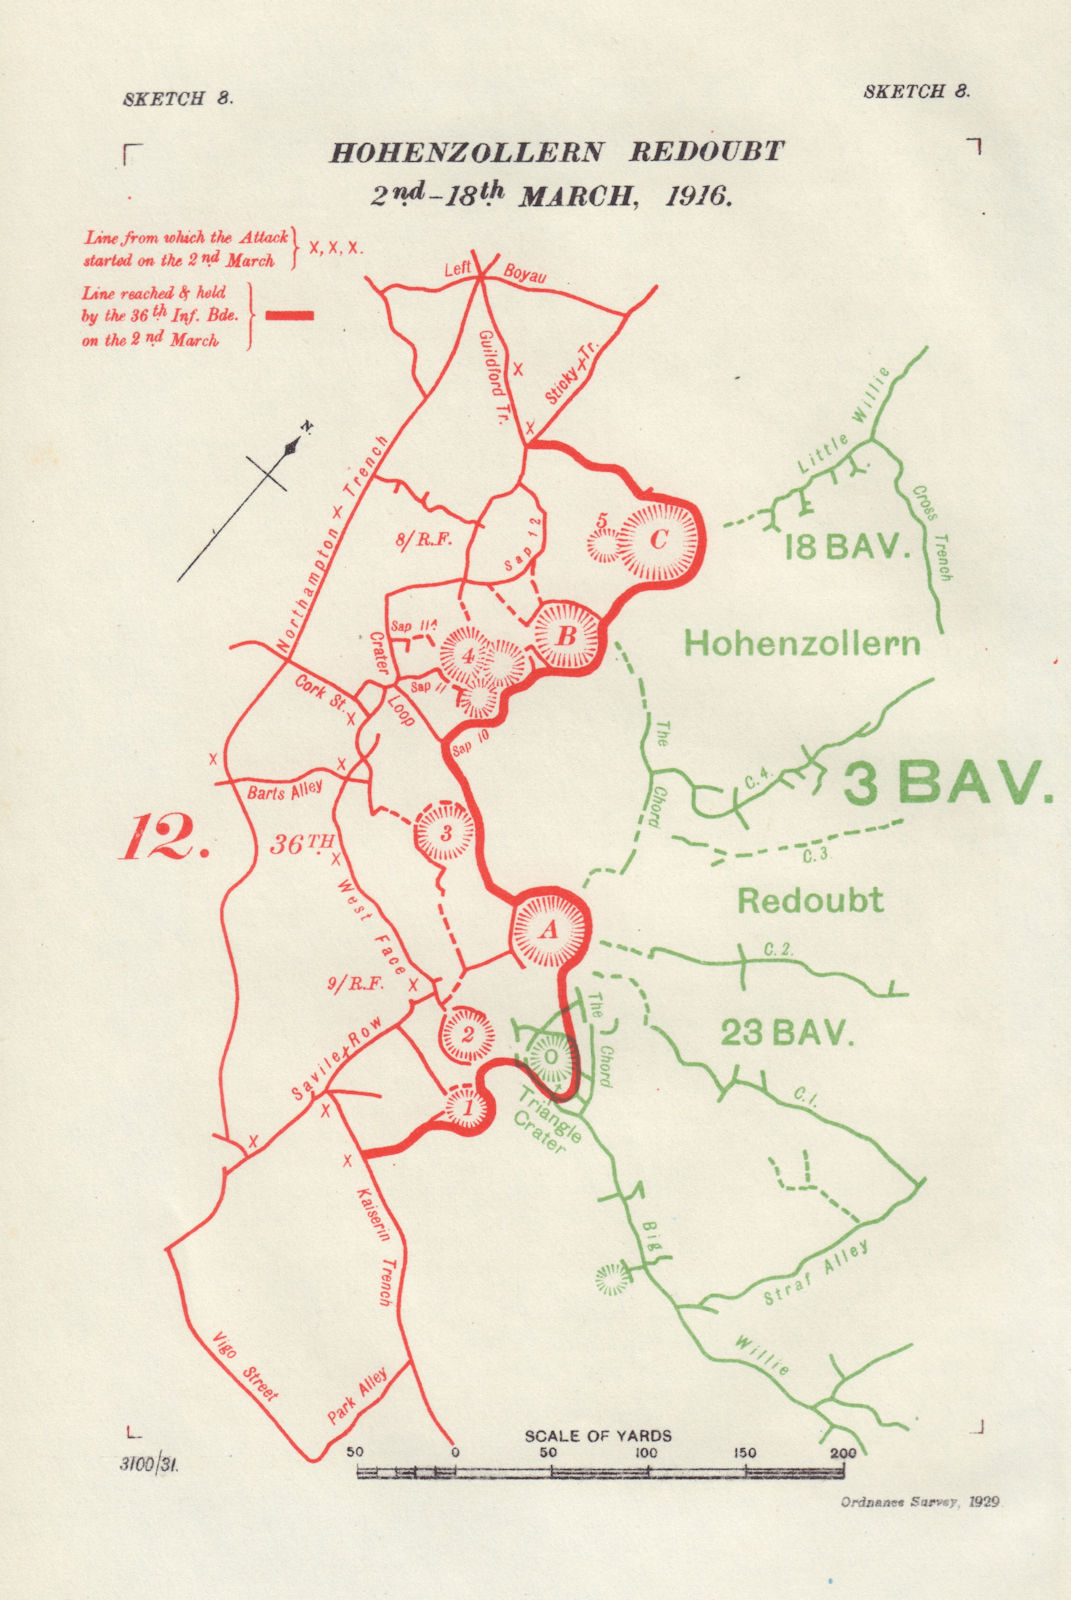 Hohenzollern Redoubt 2nd-18th March, 1916. First World War. Trenches 1932 map